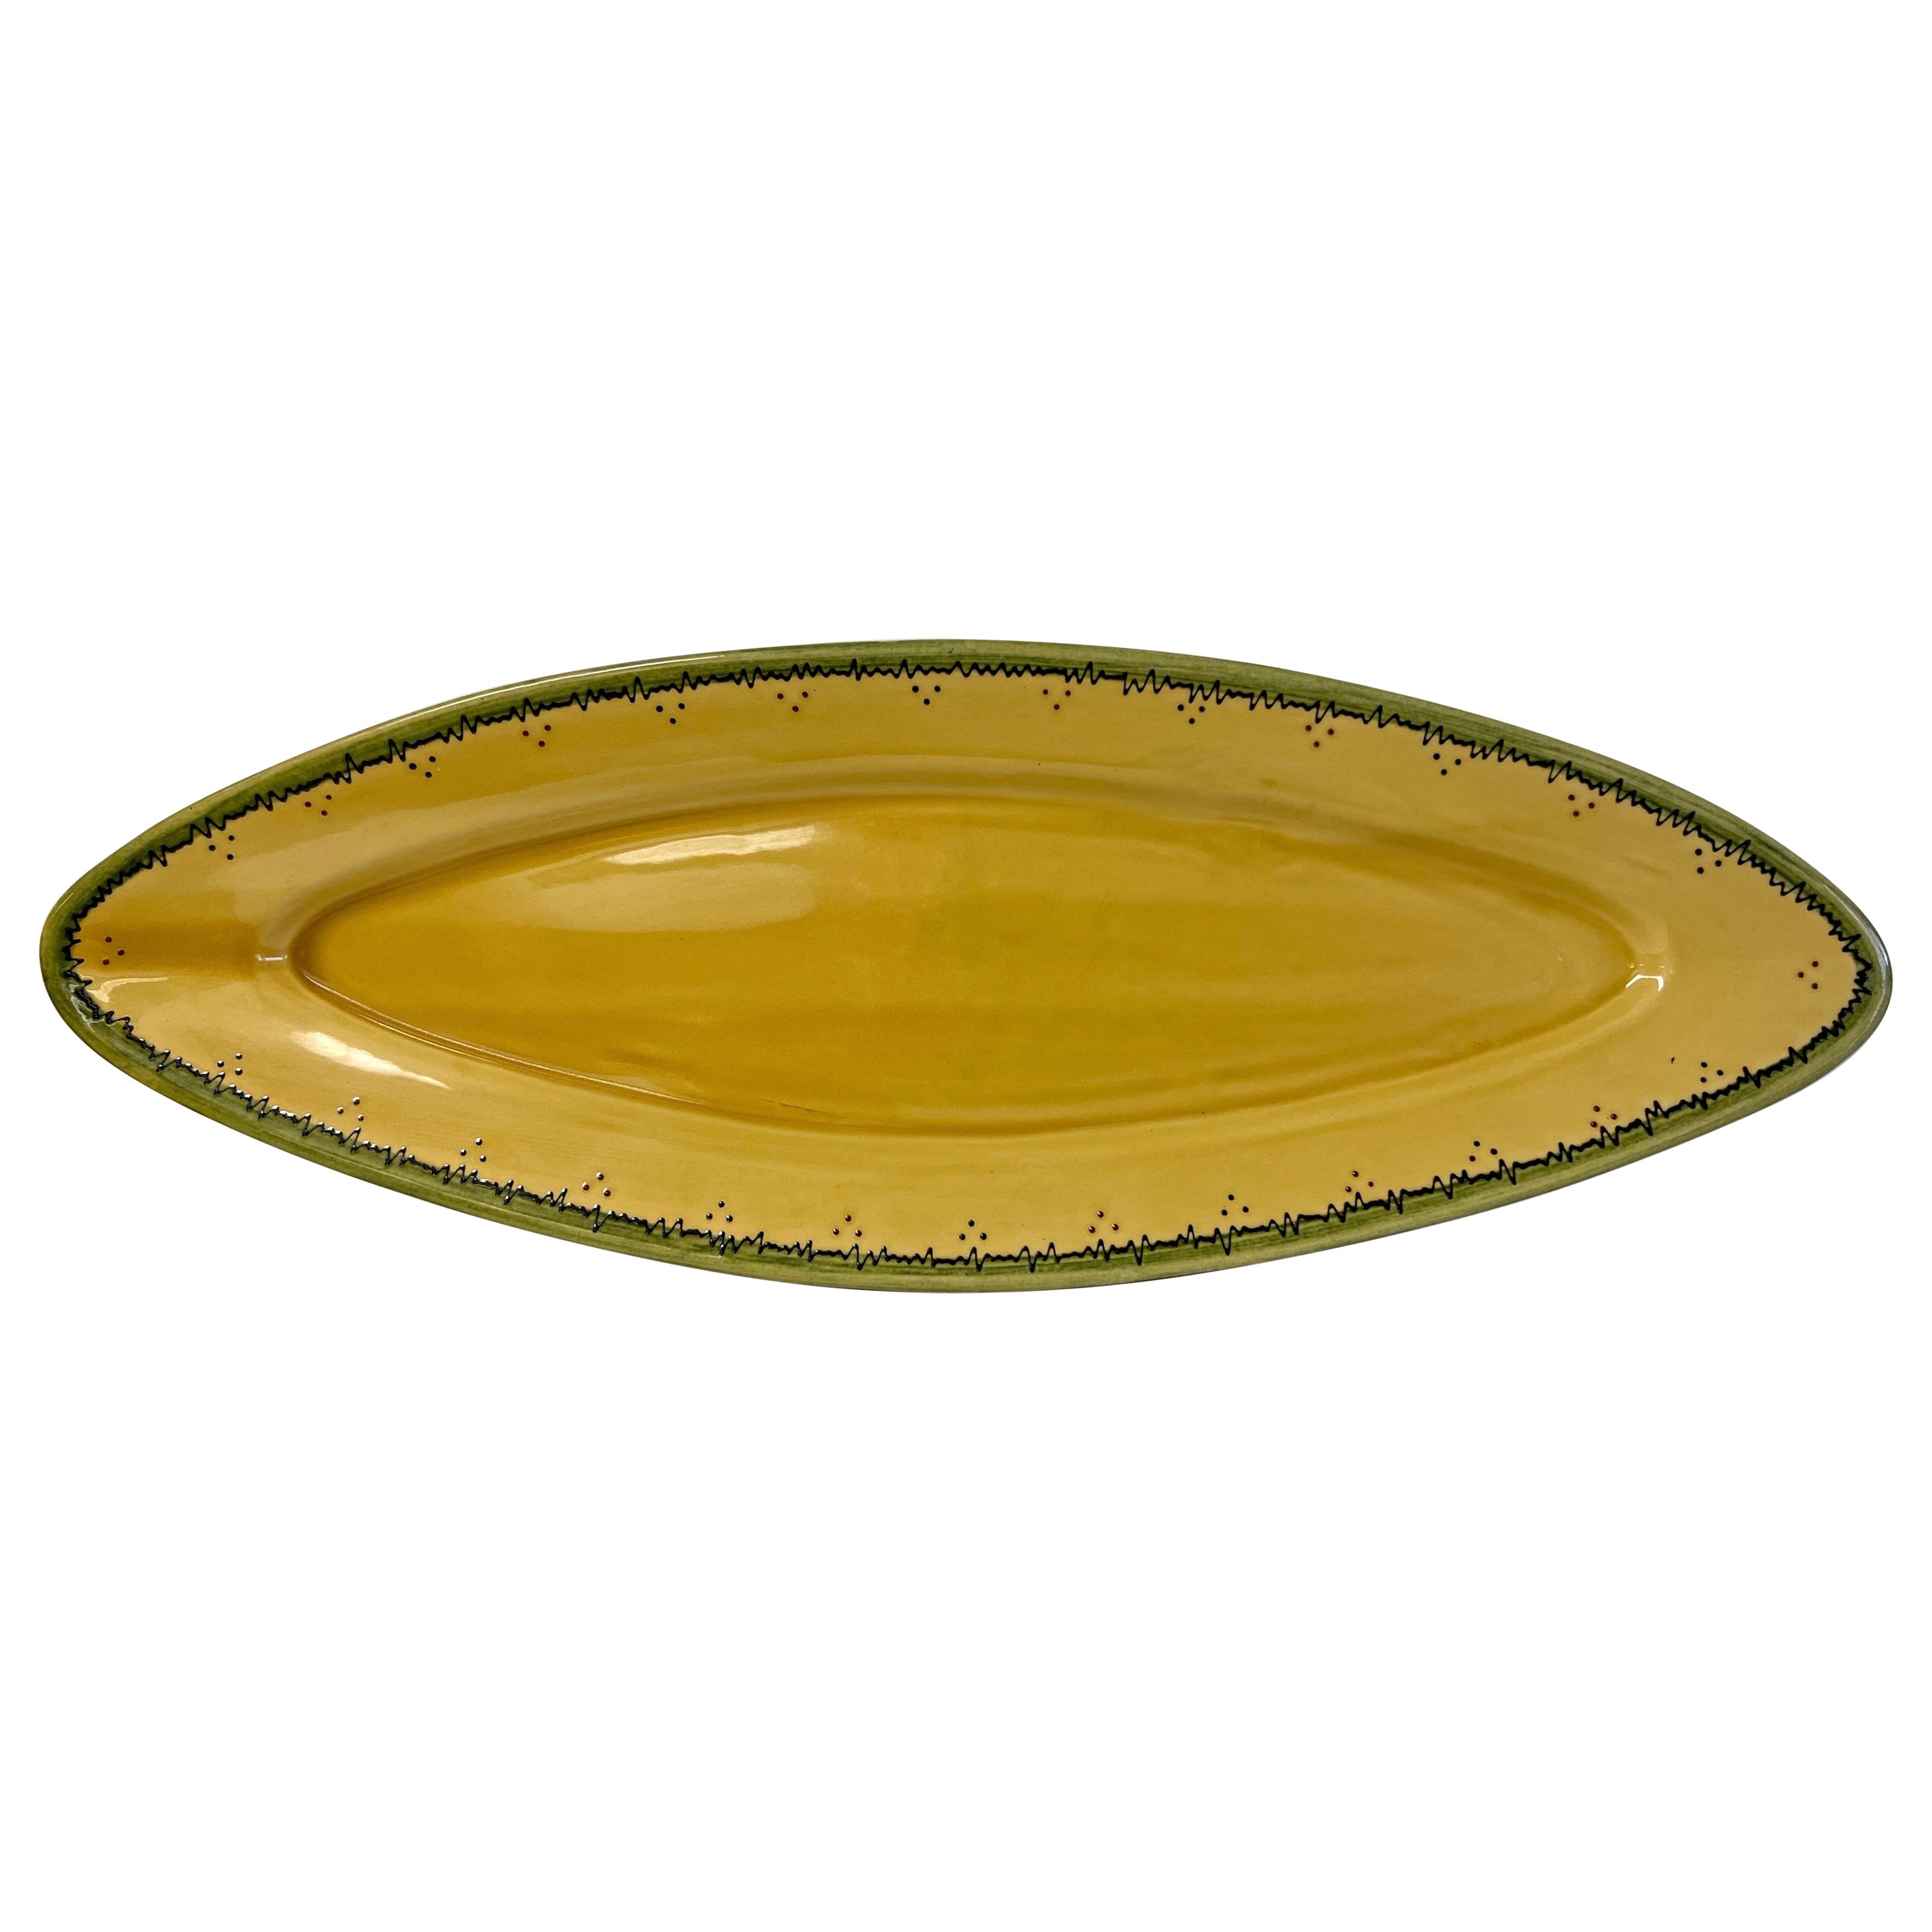 Poet Laval French Ceramic Salmon Serving Platter Dish  For Sale